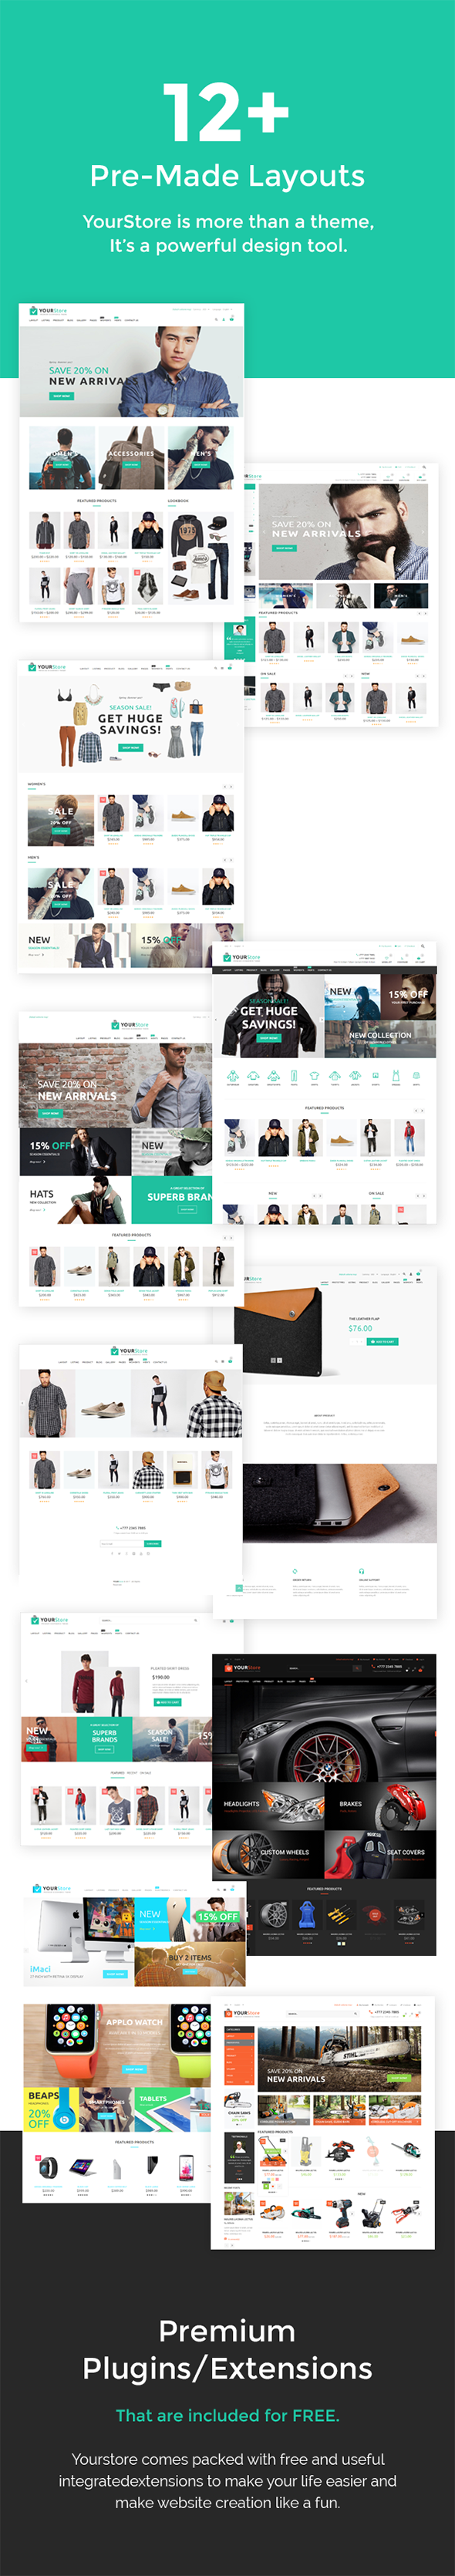 03 20 - YourStore - Woocommerce theme